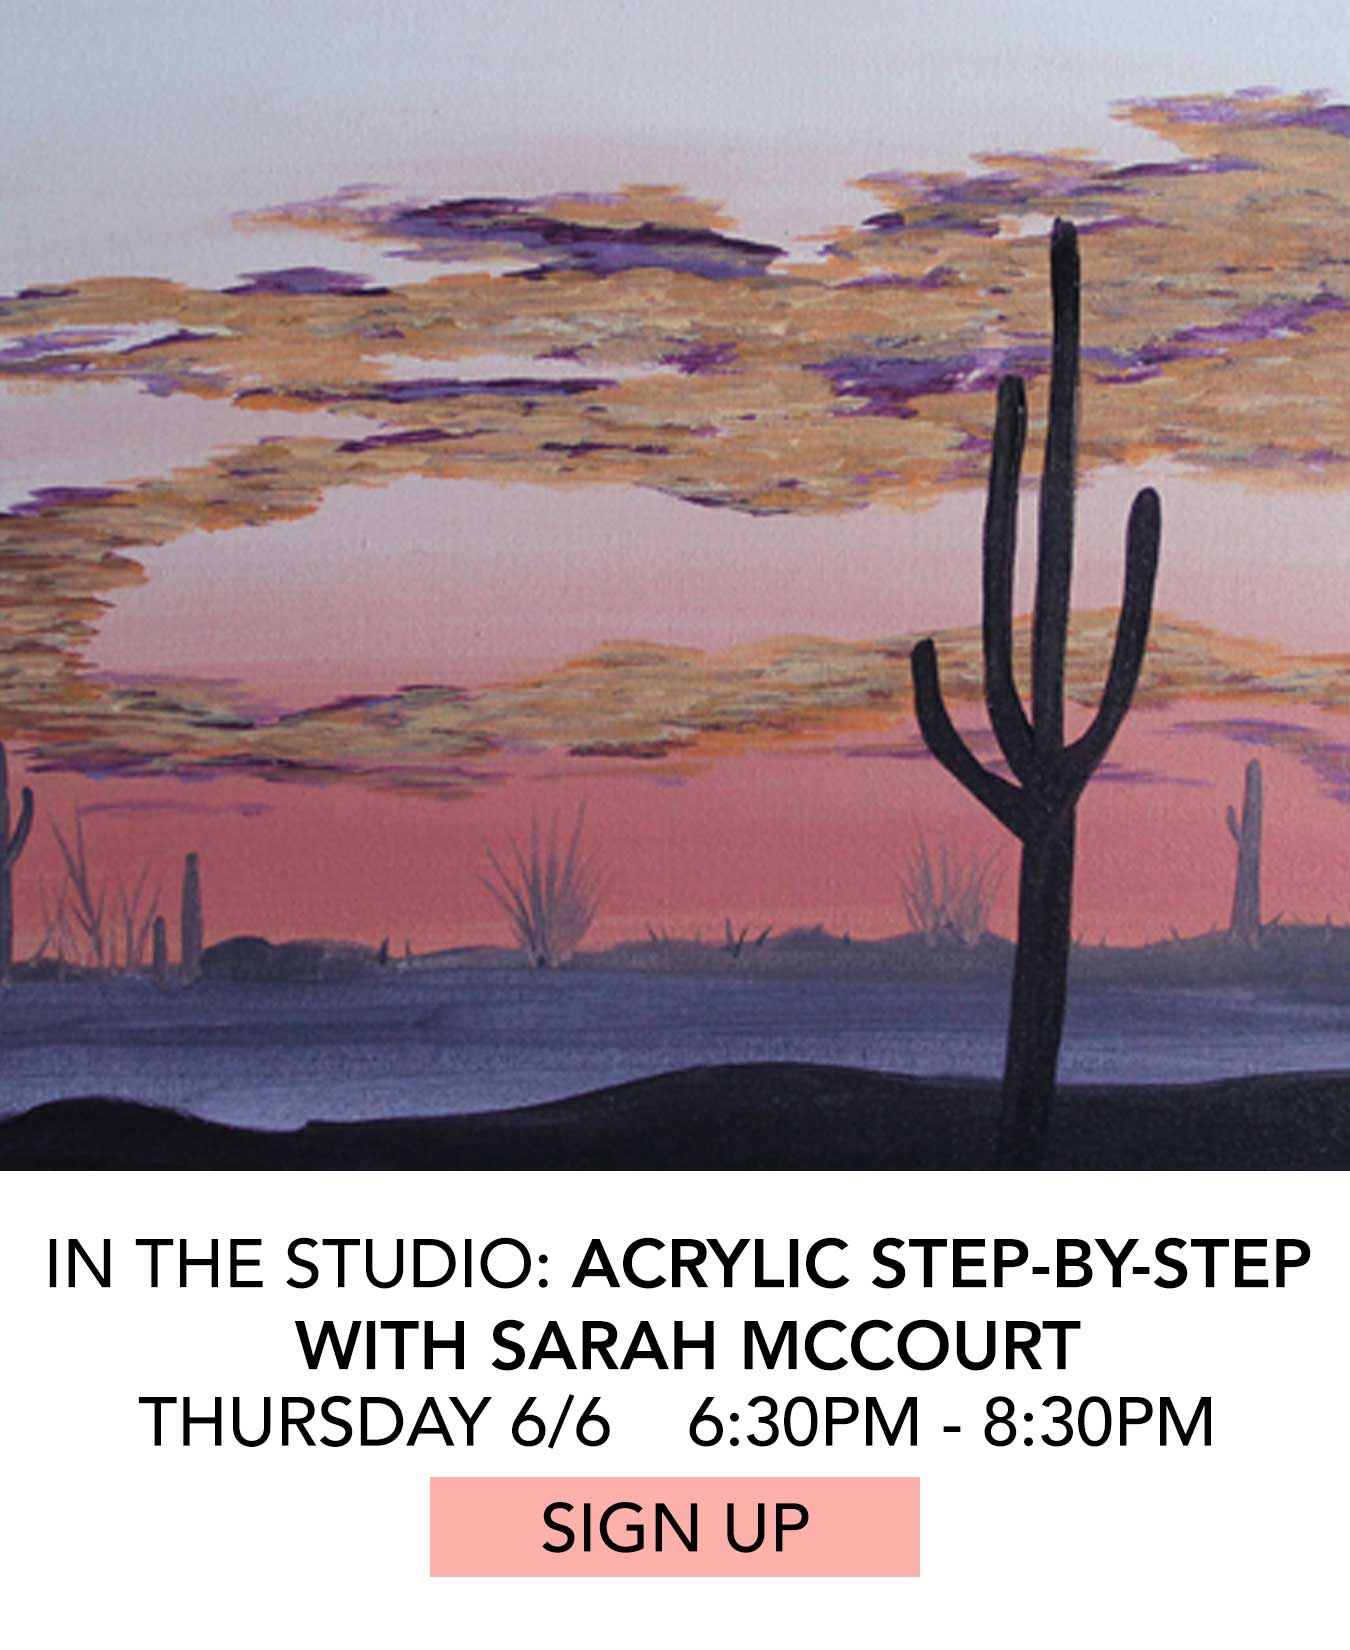 In the Studio: Acrylic Step-by-Step with Sarah McCourt. Thursday 6/6 from 6:30pm to 8:30pm. Click to Sign Up.